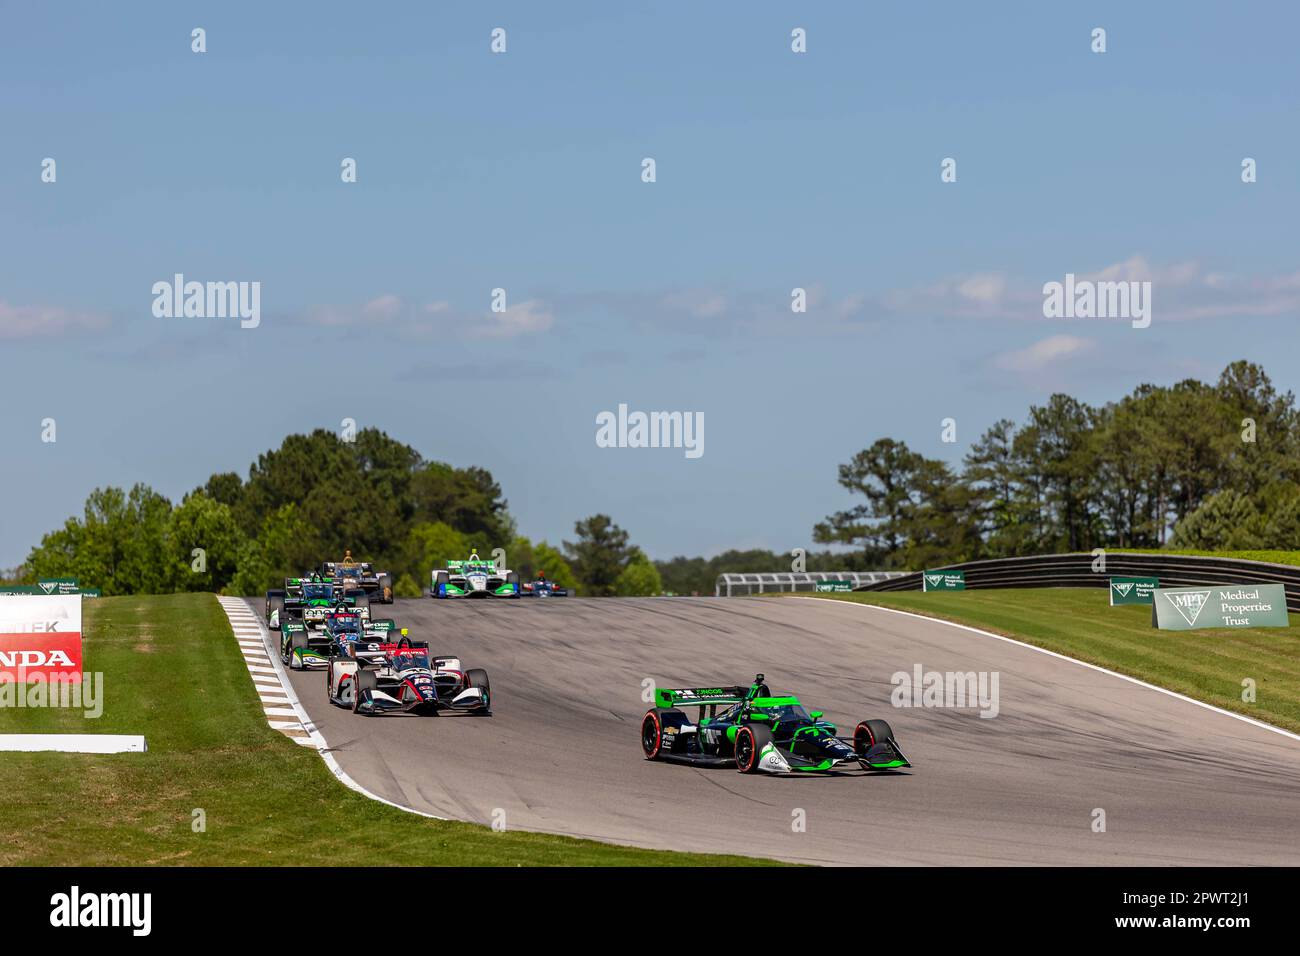 CALLUM ILOTT (77) of Cambridge, Cambridgeshire, England races through the turns during the Childrens of Alabama Indy Grand Prix at the Barber Motorsports Park in Birmingham AL.(Credit Image: © Riley W Thompson Grindstone Media Group/Action Sports Photography/Cal Sport Media) Stock Photo